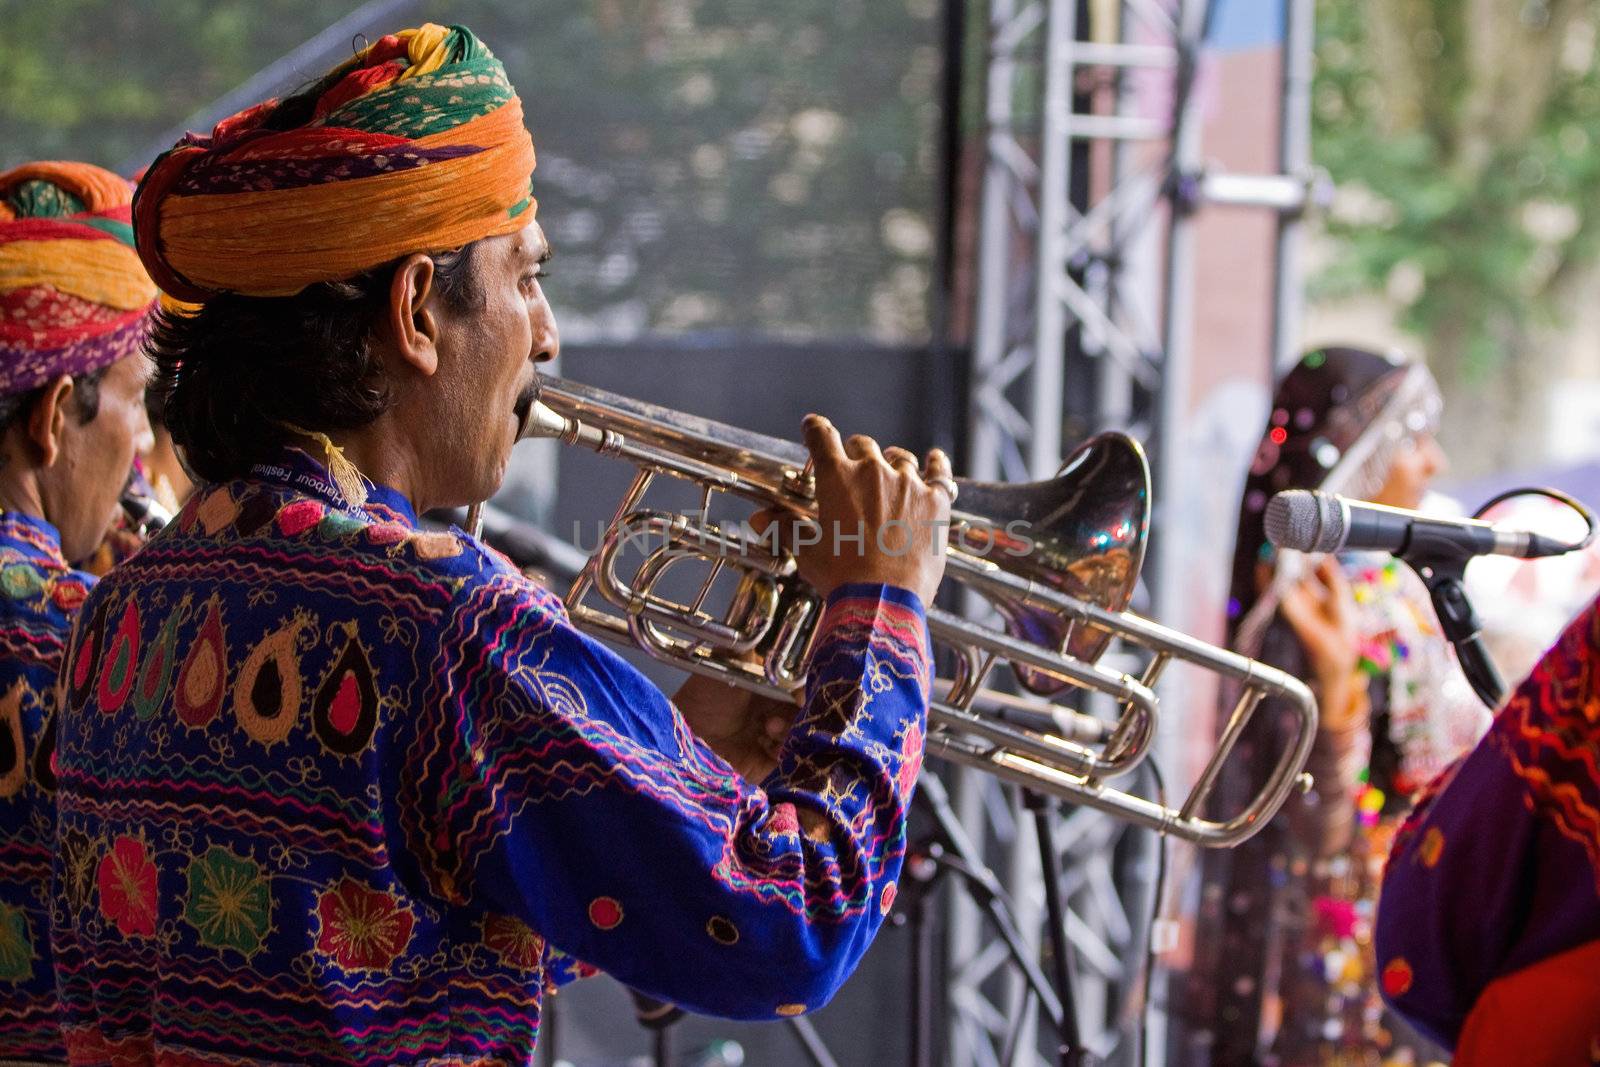 BRISTOL, ENGLAND - JULY 31: Members of the Jaipur Kawa brass band performing at the Harbour Festival in Bristol, England on July 31, 2010. Founded in 1971, this free three day event played host to more than 250,000 spectators